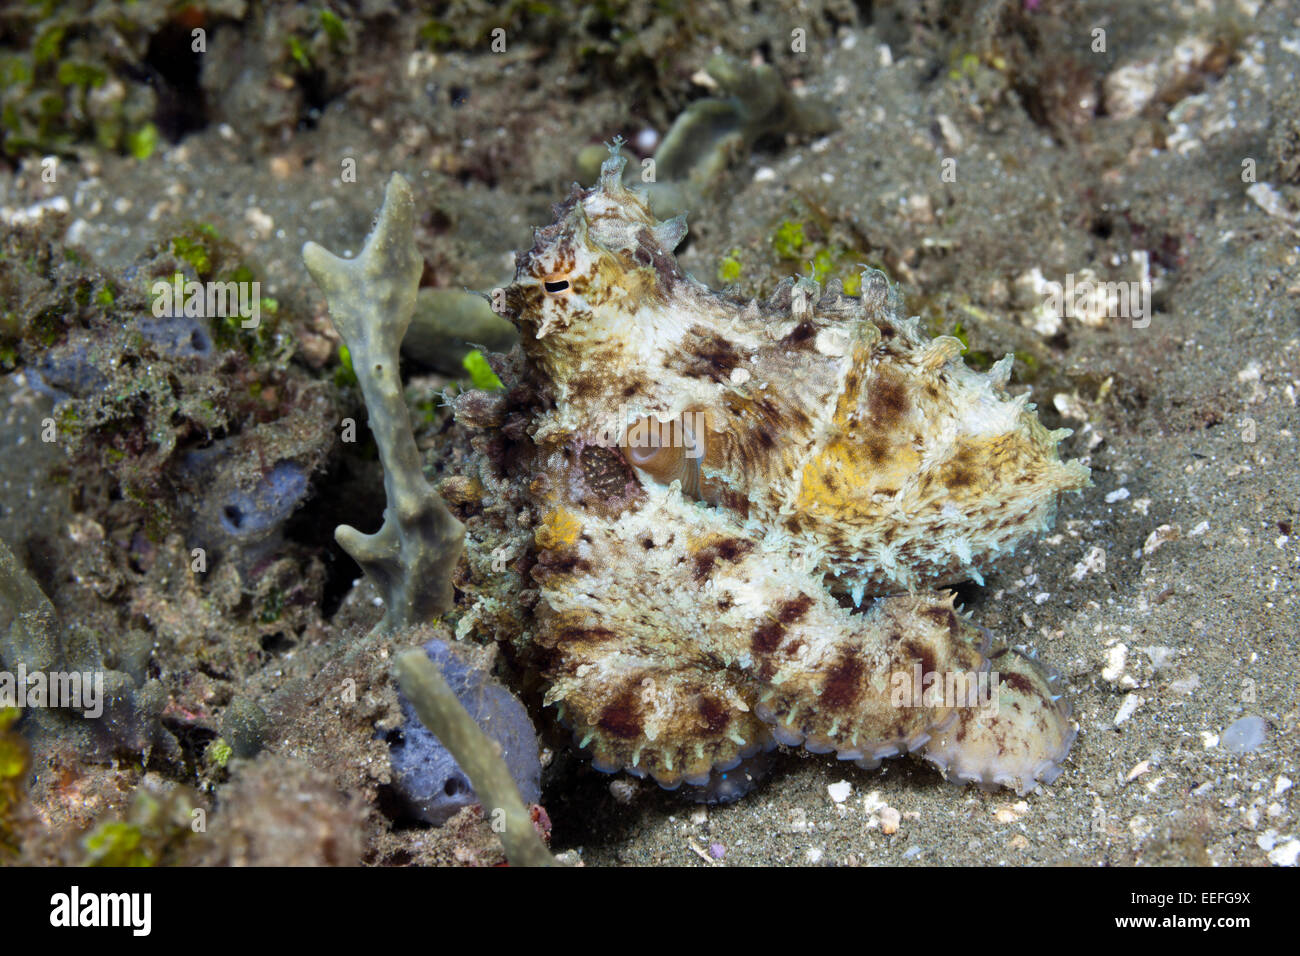 Small Octopus, Octopus sp., Ambon, Moluccas, Indonesia Stock Photo